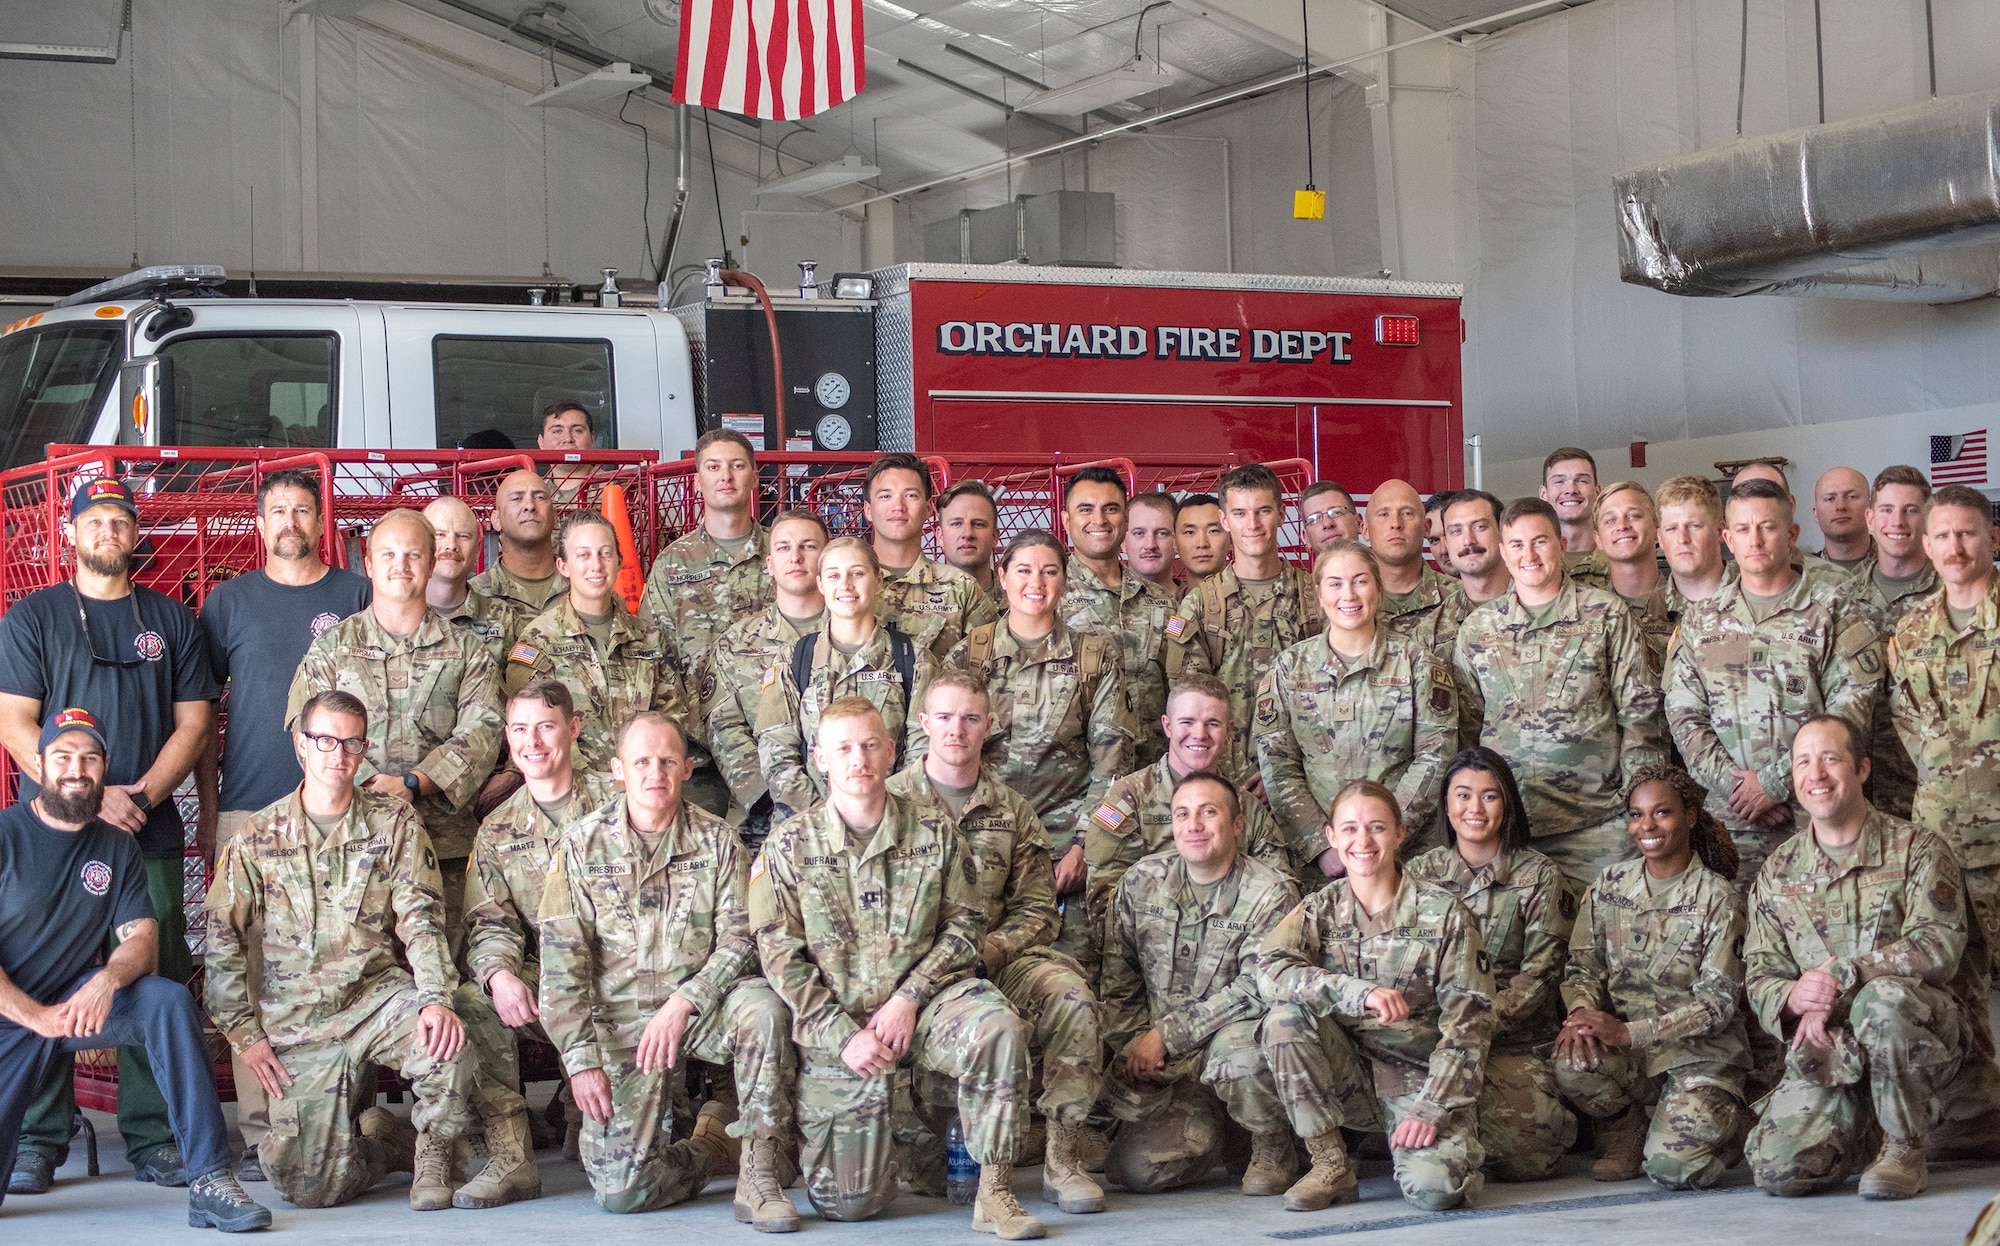 More than 60 Idaho National Guardsmen completed wildland firefighting training in Boise, Idaho, throughout June, bringing the number of Guardsmen available to assist the Idaho Department of Lands in the event the governor declares a state of emergency to approximately 170.